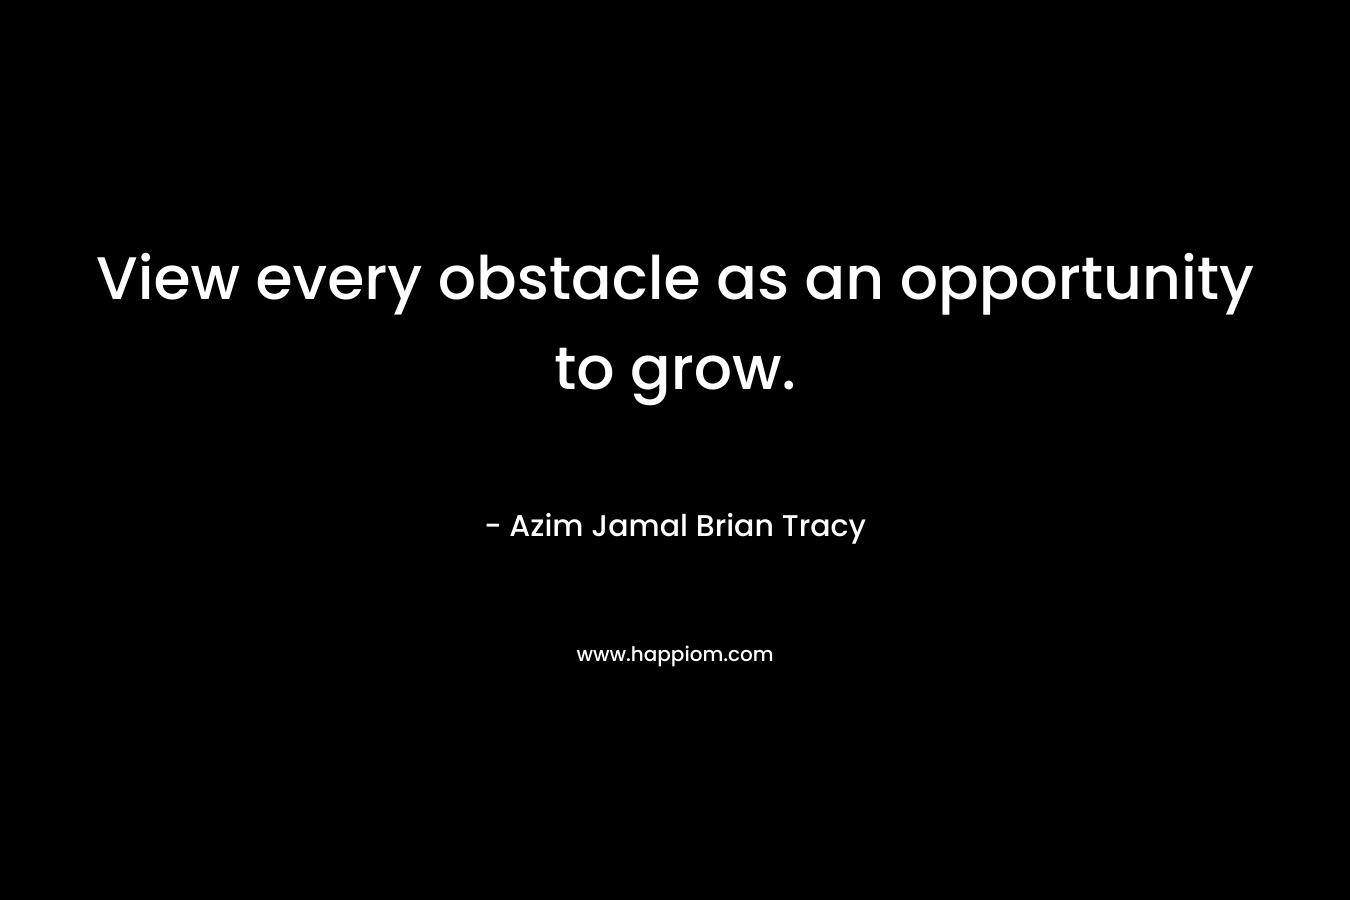 View every obstacle as an opportunity to grow.